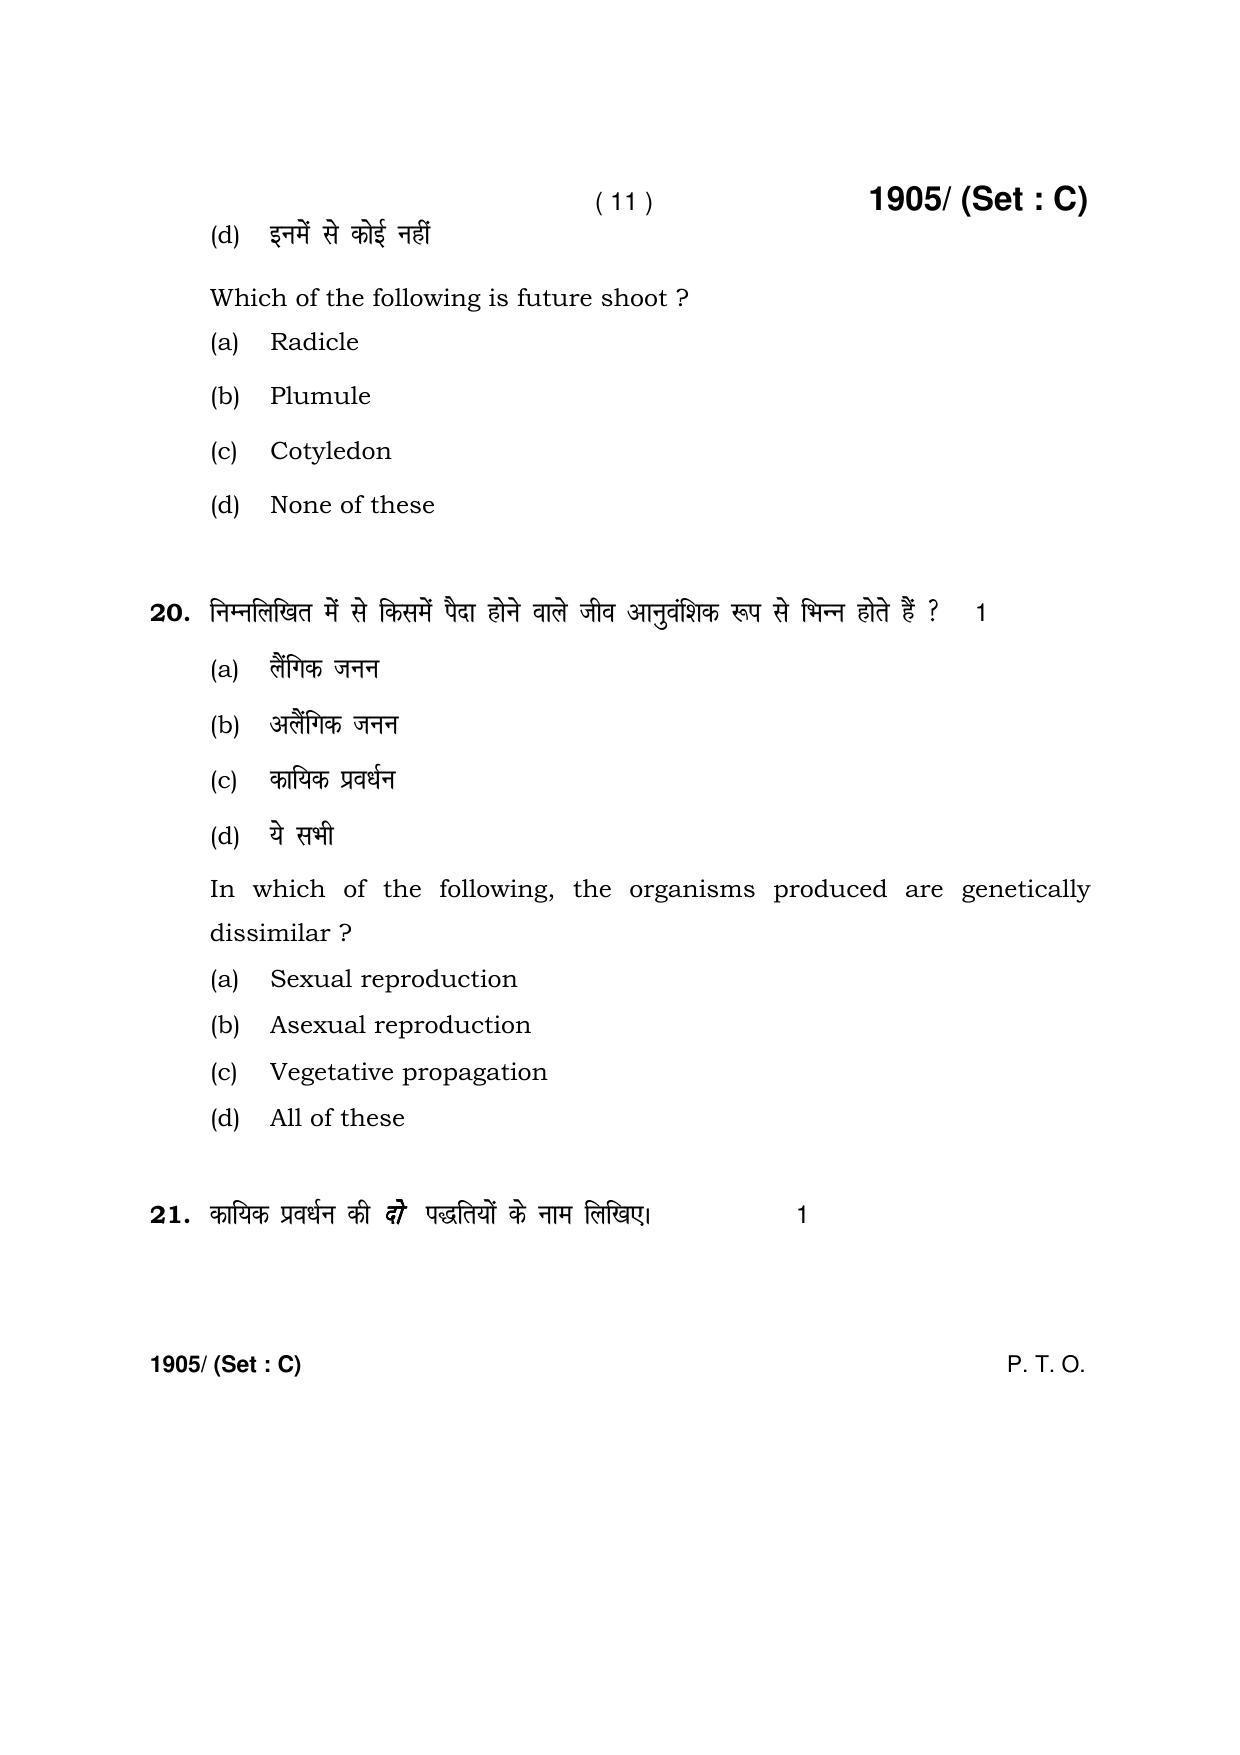 Haryana Board HBSE Class 10 Science -C 2017 Question Paper - Page 11